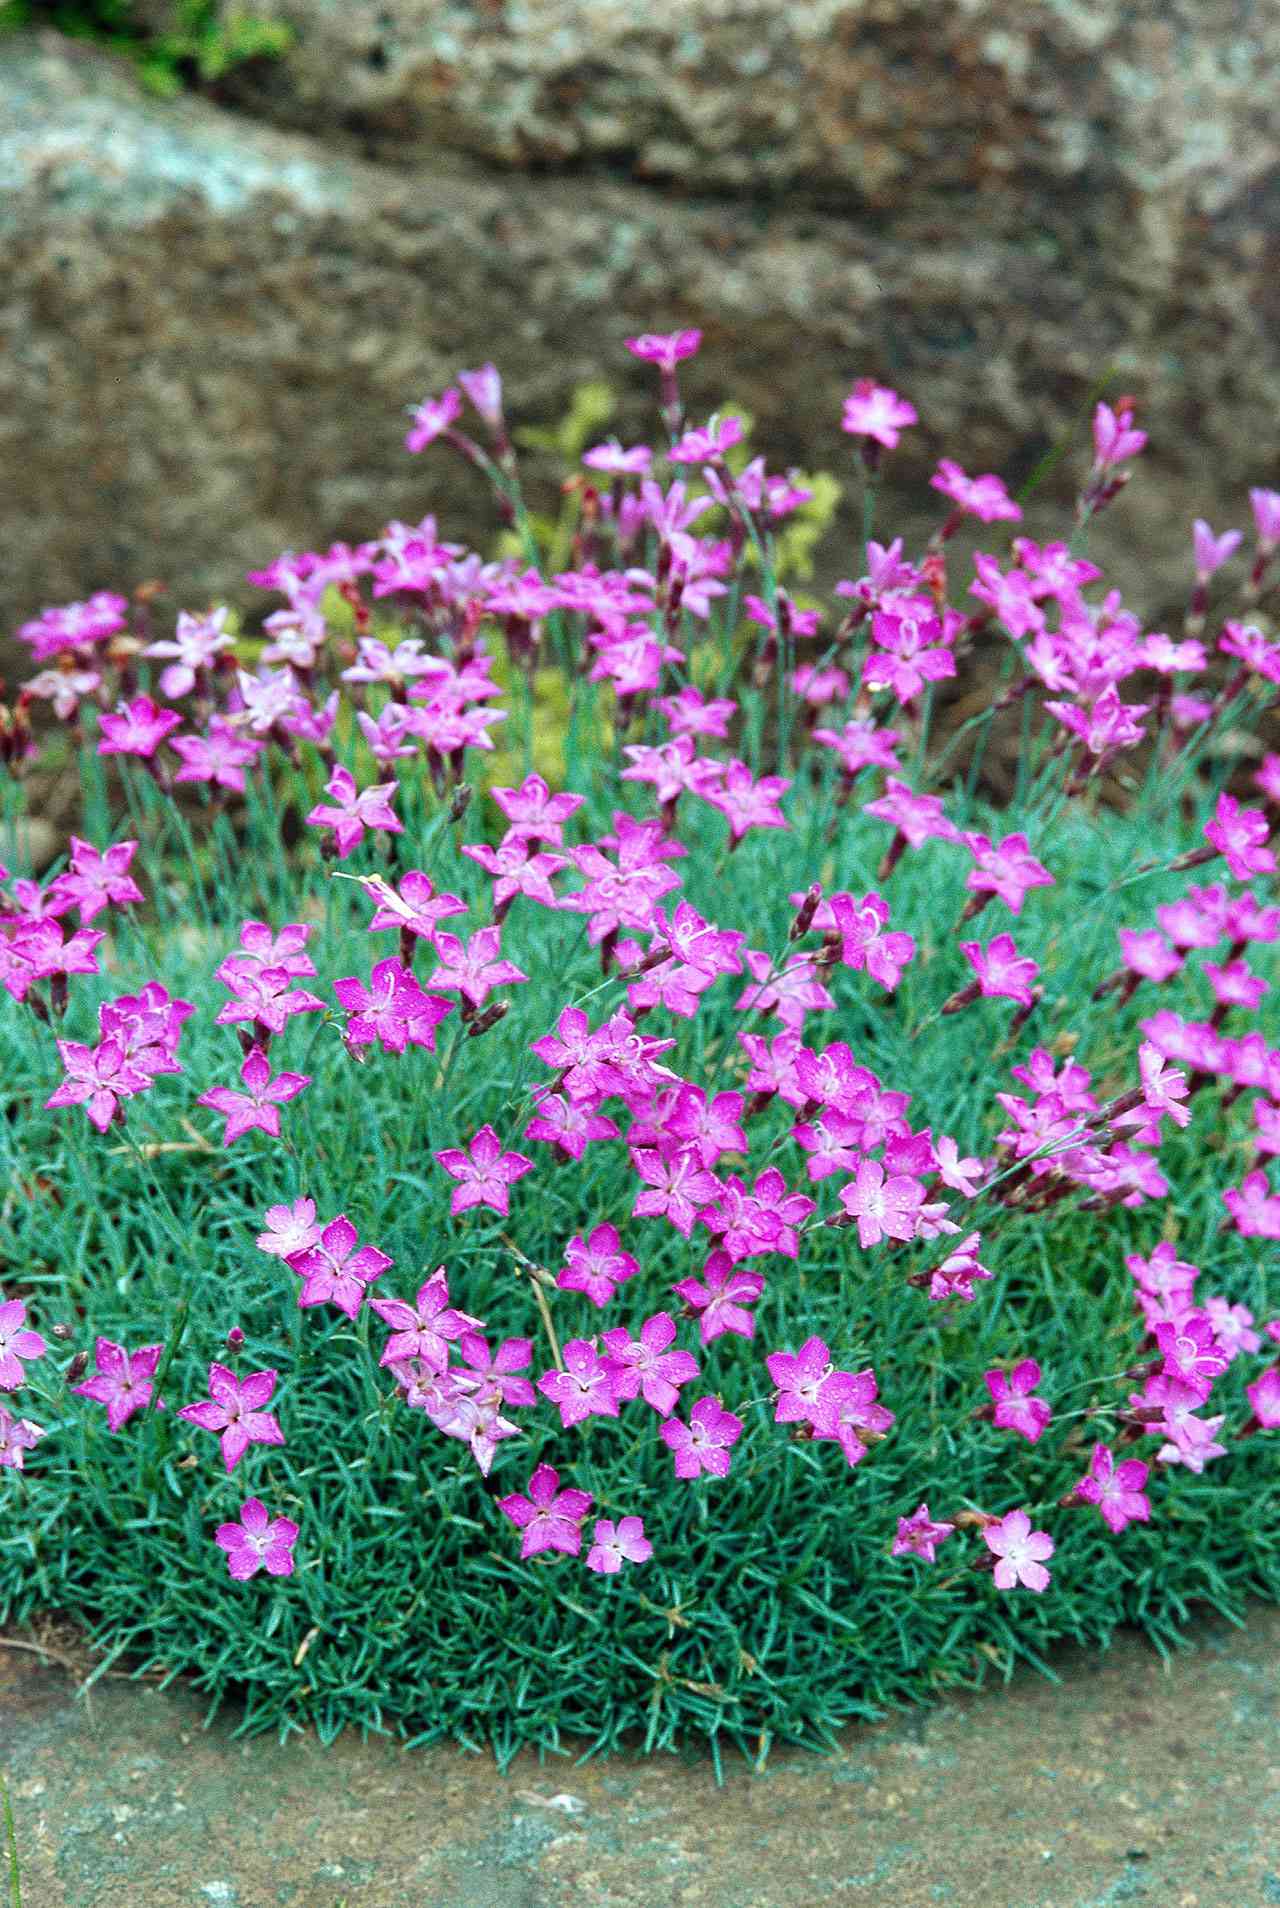 Drought Tolerant Groundcovers Better, Small Pink Ground Cover Plants Full Sun Low Maintenance Uk